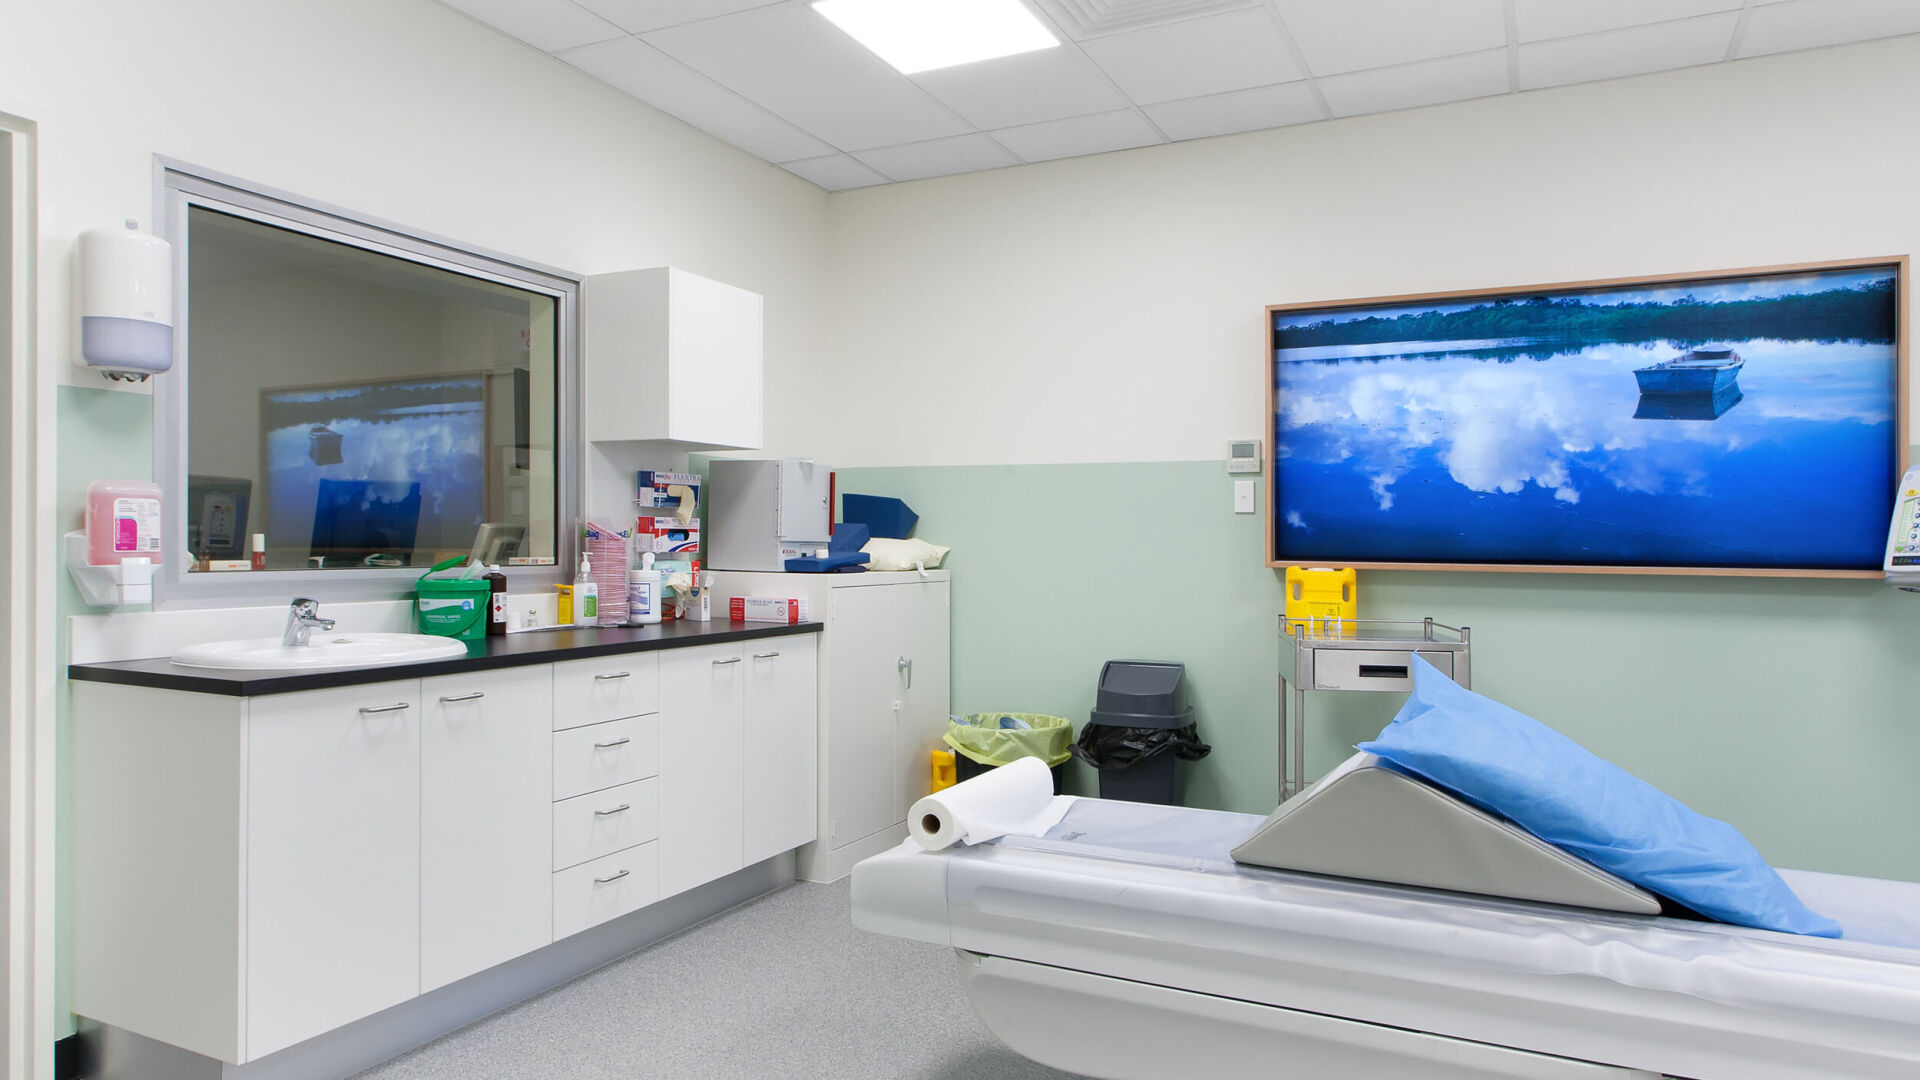 Gympie Radiology